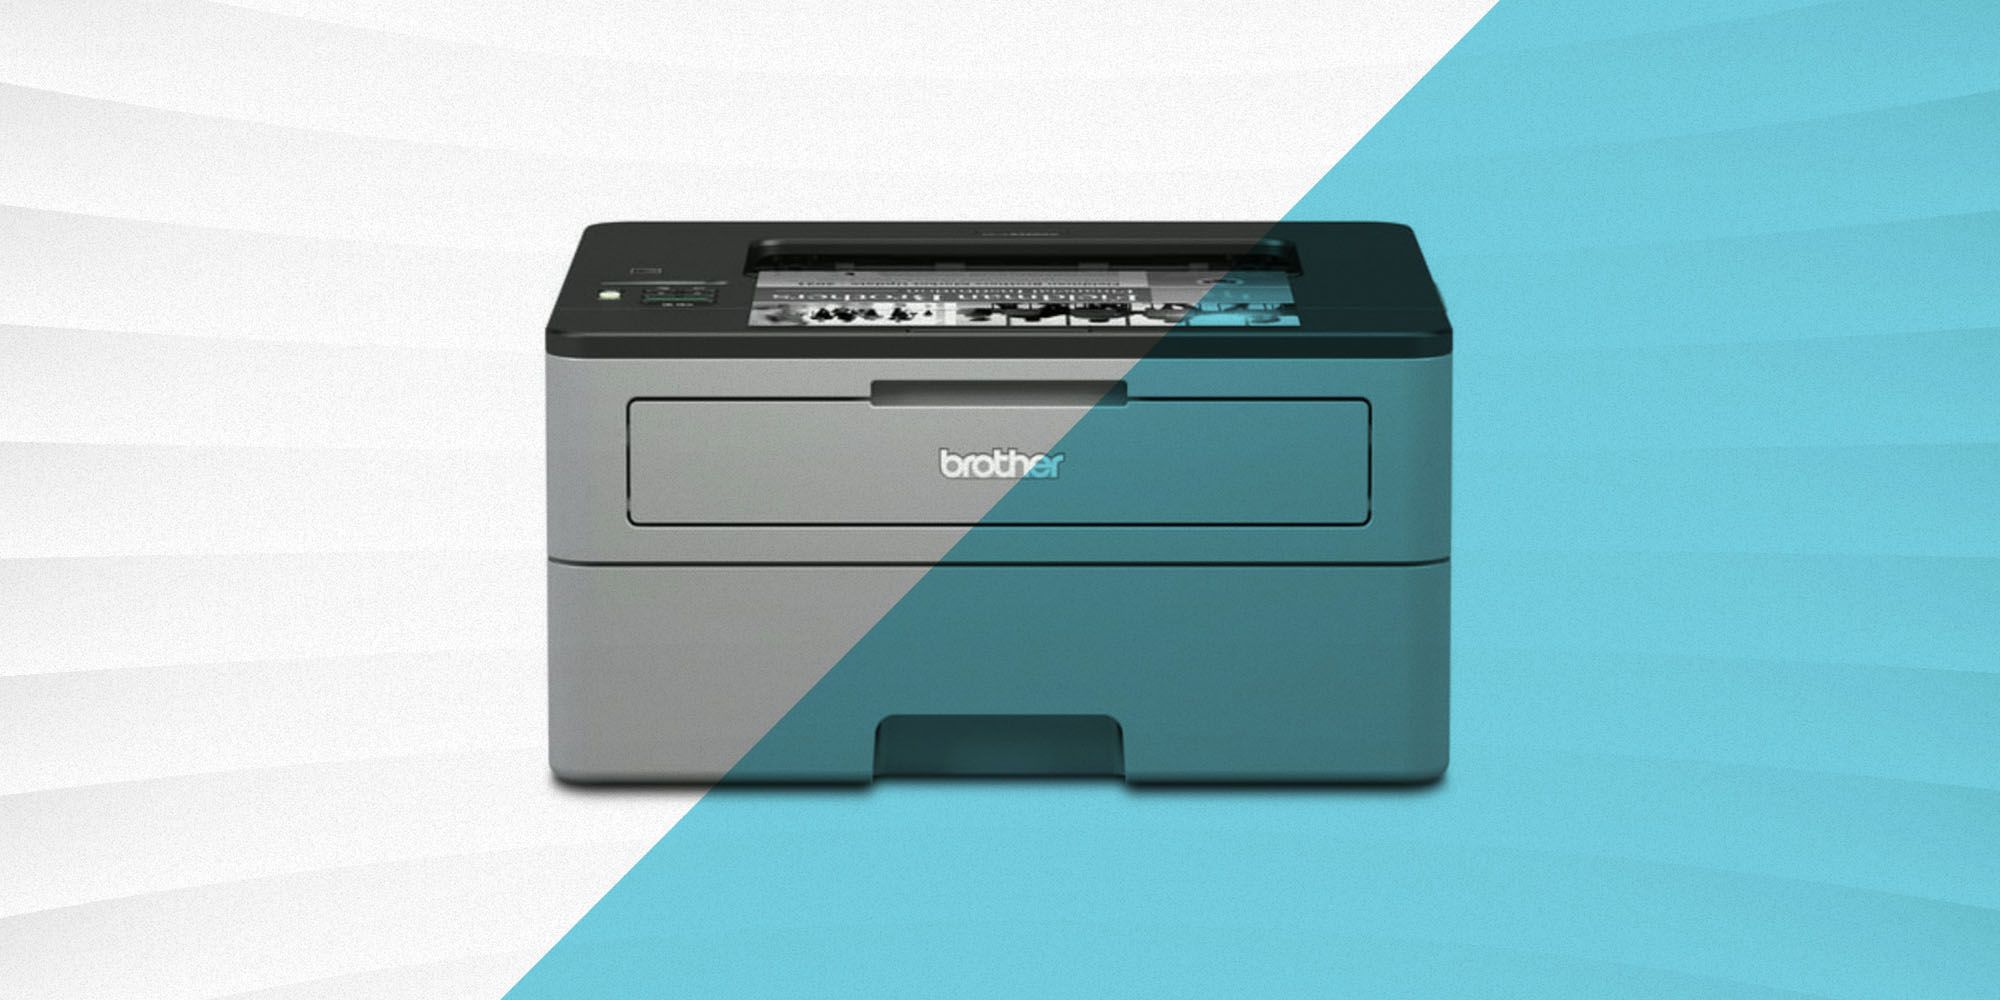 albue Strædet thong Følg os The Best Small Printers in 2023 — Compact Printers for Home Offices